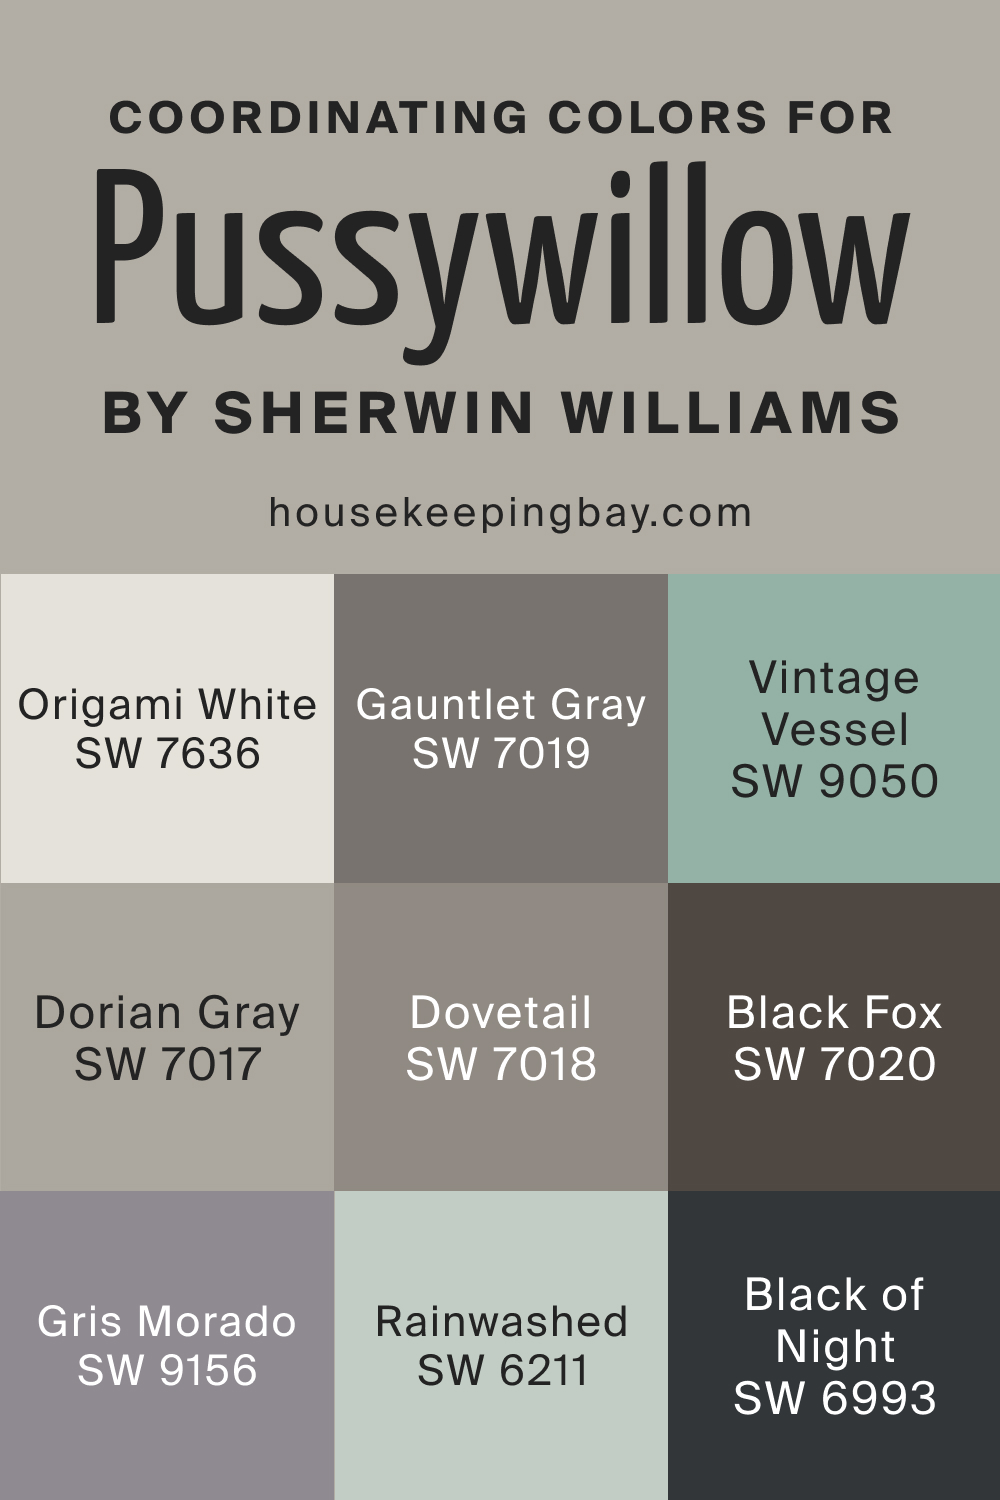 Coordinating Colors for Pussywillow SW 7643 by Sherwin Williams